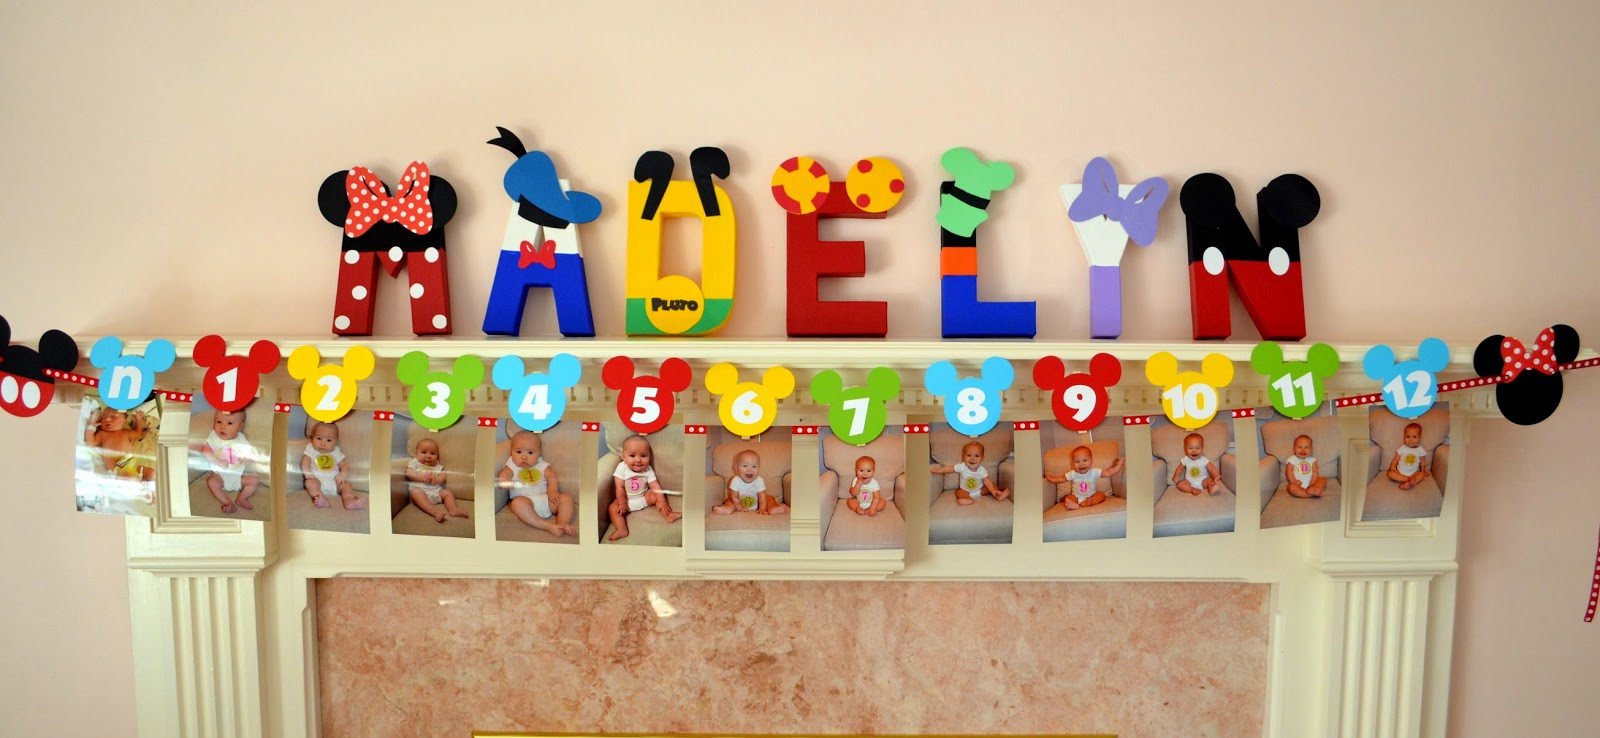 Mickey Mouse Clubhouse Birthday Party Ideas
 Flavors by Four Mickey Mouse Clubhouse Birthday Party Ideas